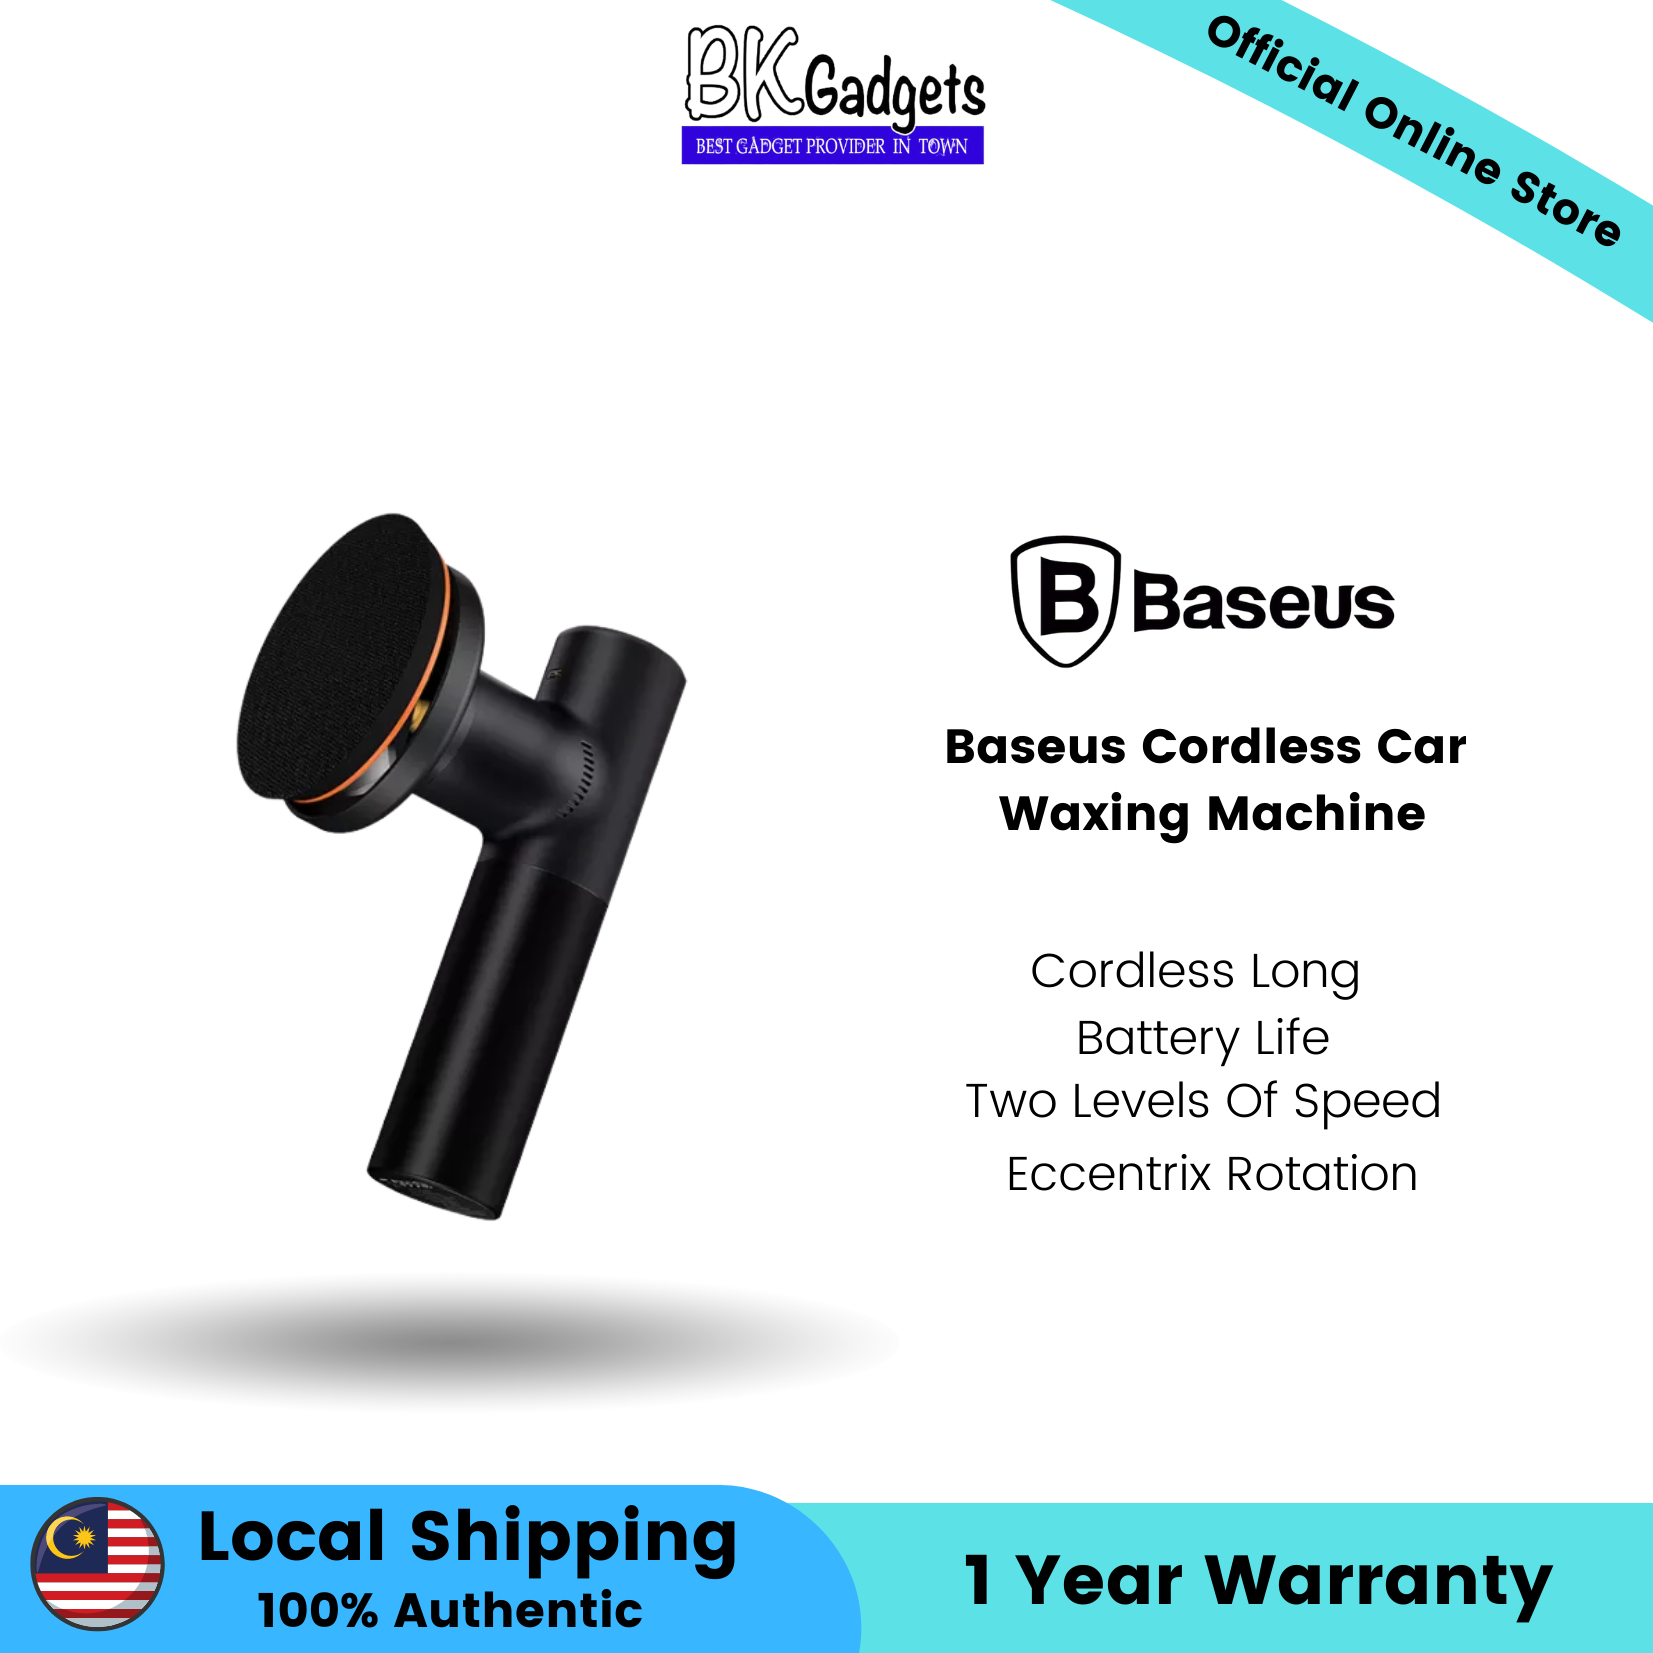 Baseus Cordless Car Waxing Machine - Cordless Long Battery Life  Two Levels Of Speed  Eccentrix Rotation